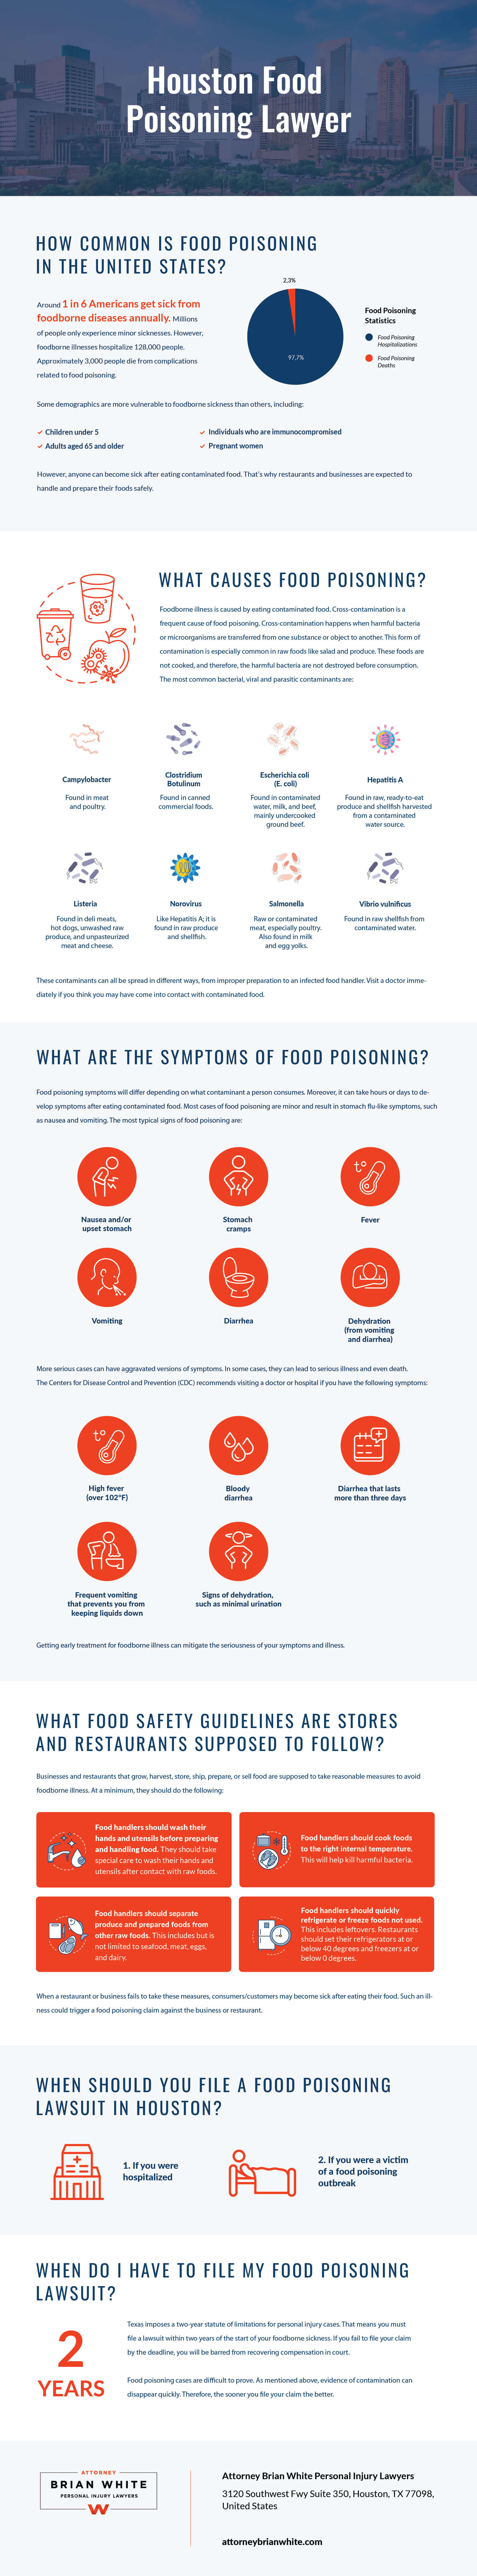 Houston Food Poisoning Infographic by Attorney Brian White Personal Injury Lawyers